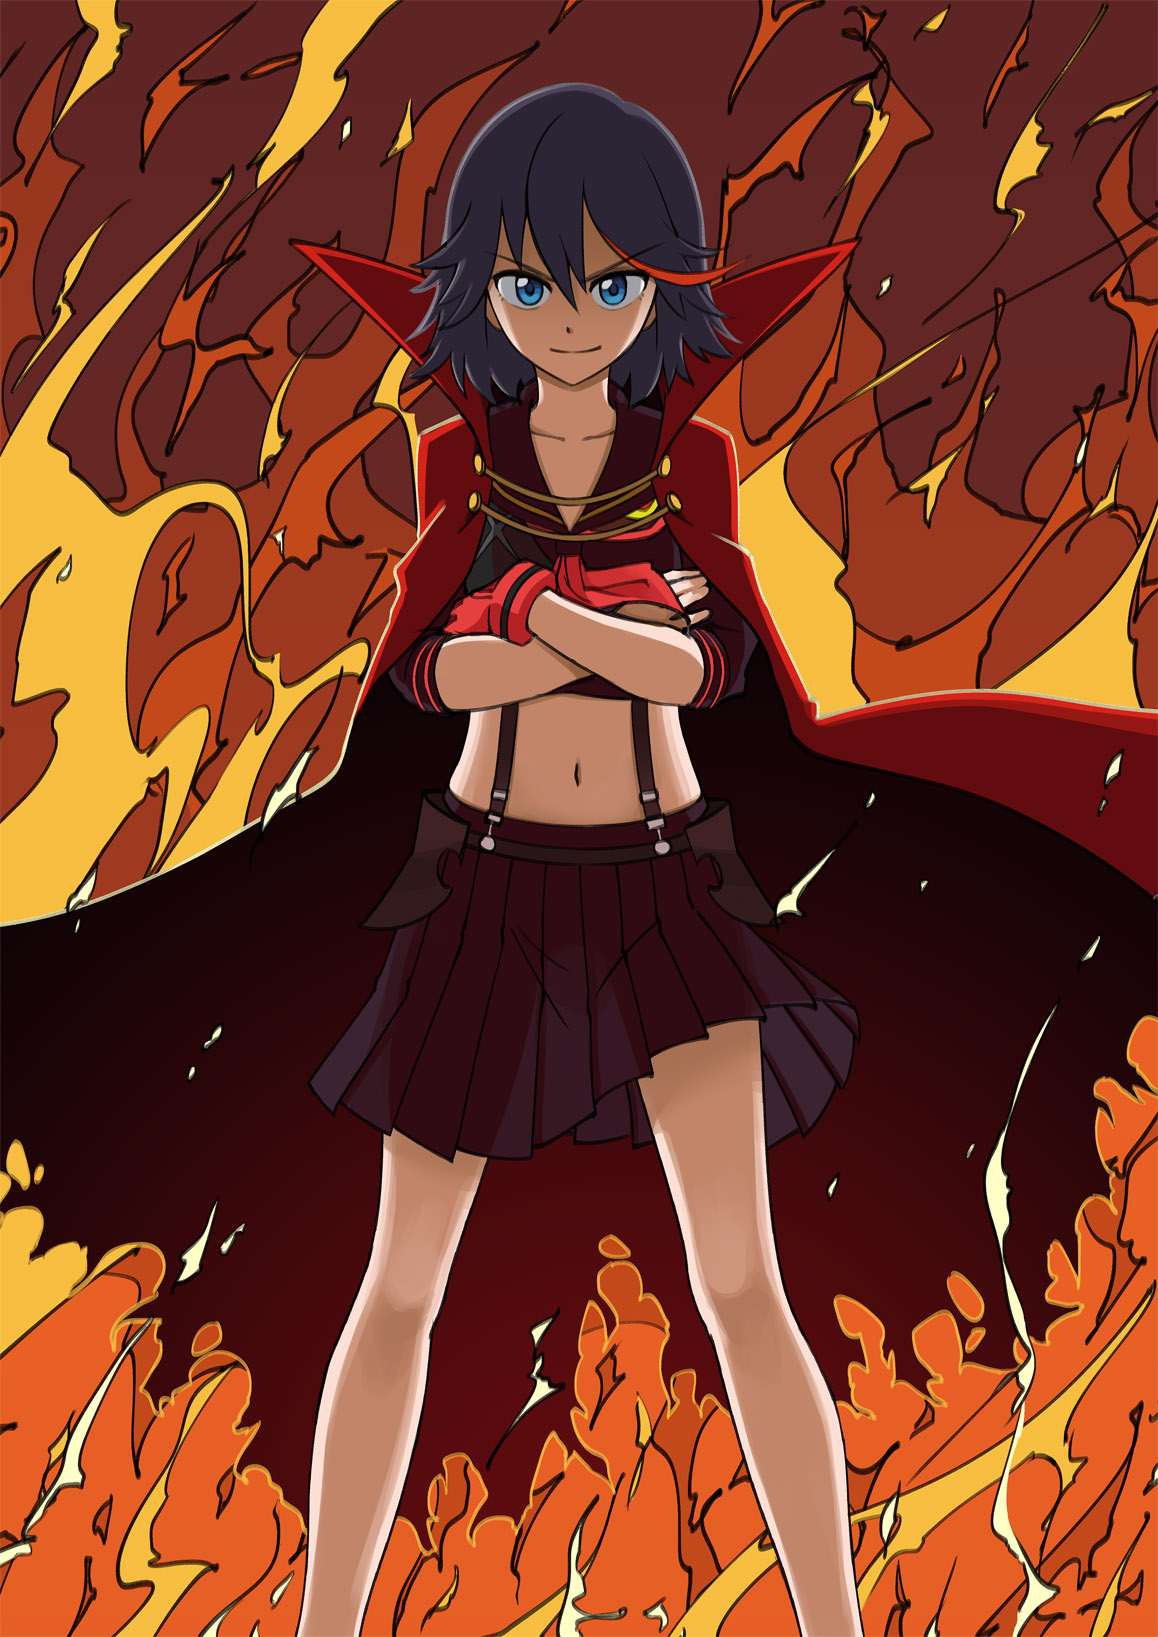 https://note256.files.wordpress.com/2014/04/anime-d0bfd0bed0b4d0b1d0bed180d0bad0b0-kill-la-kill-ryc5abko-matoi-902439.jpeg